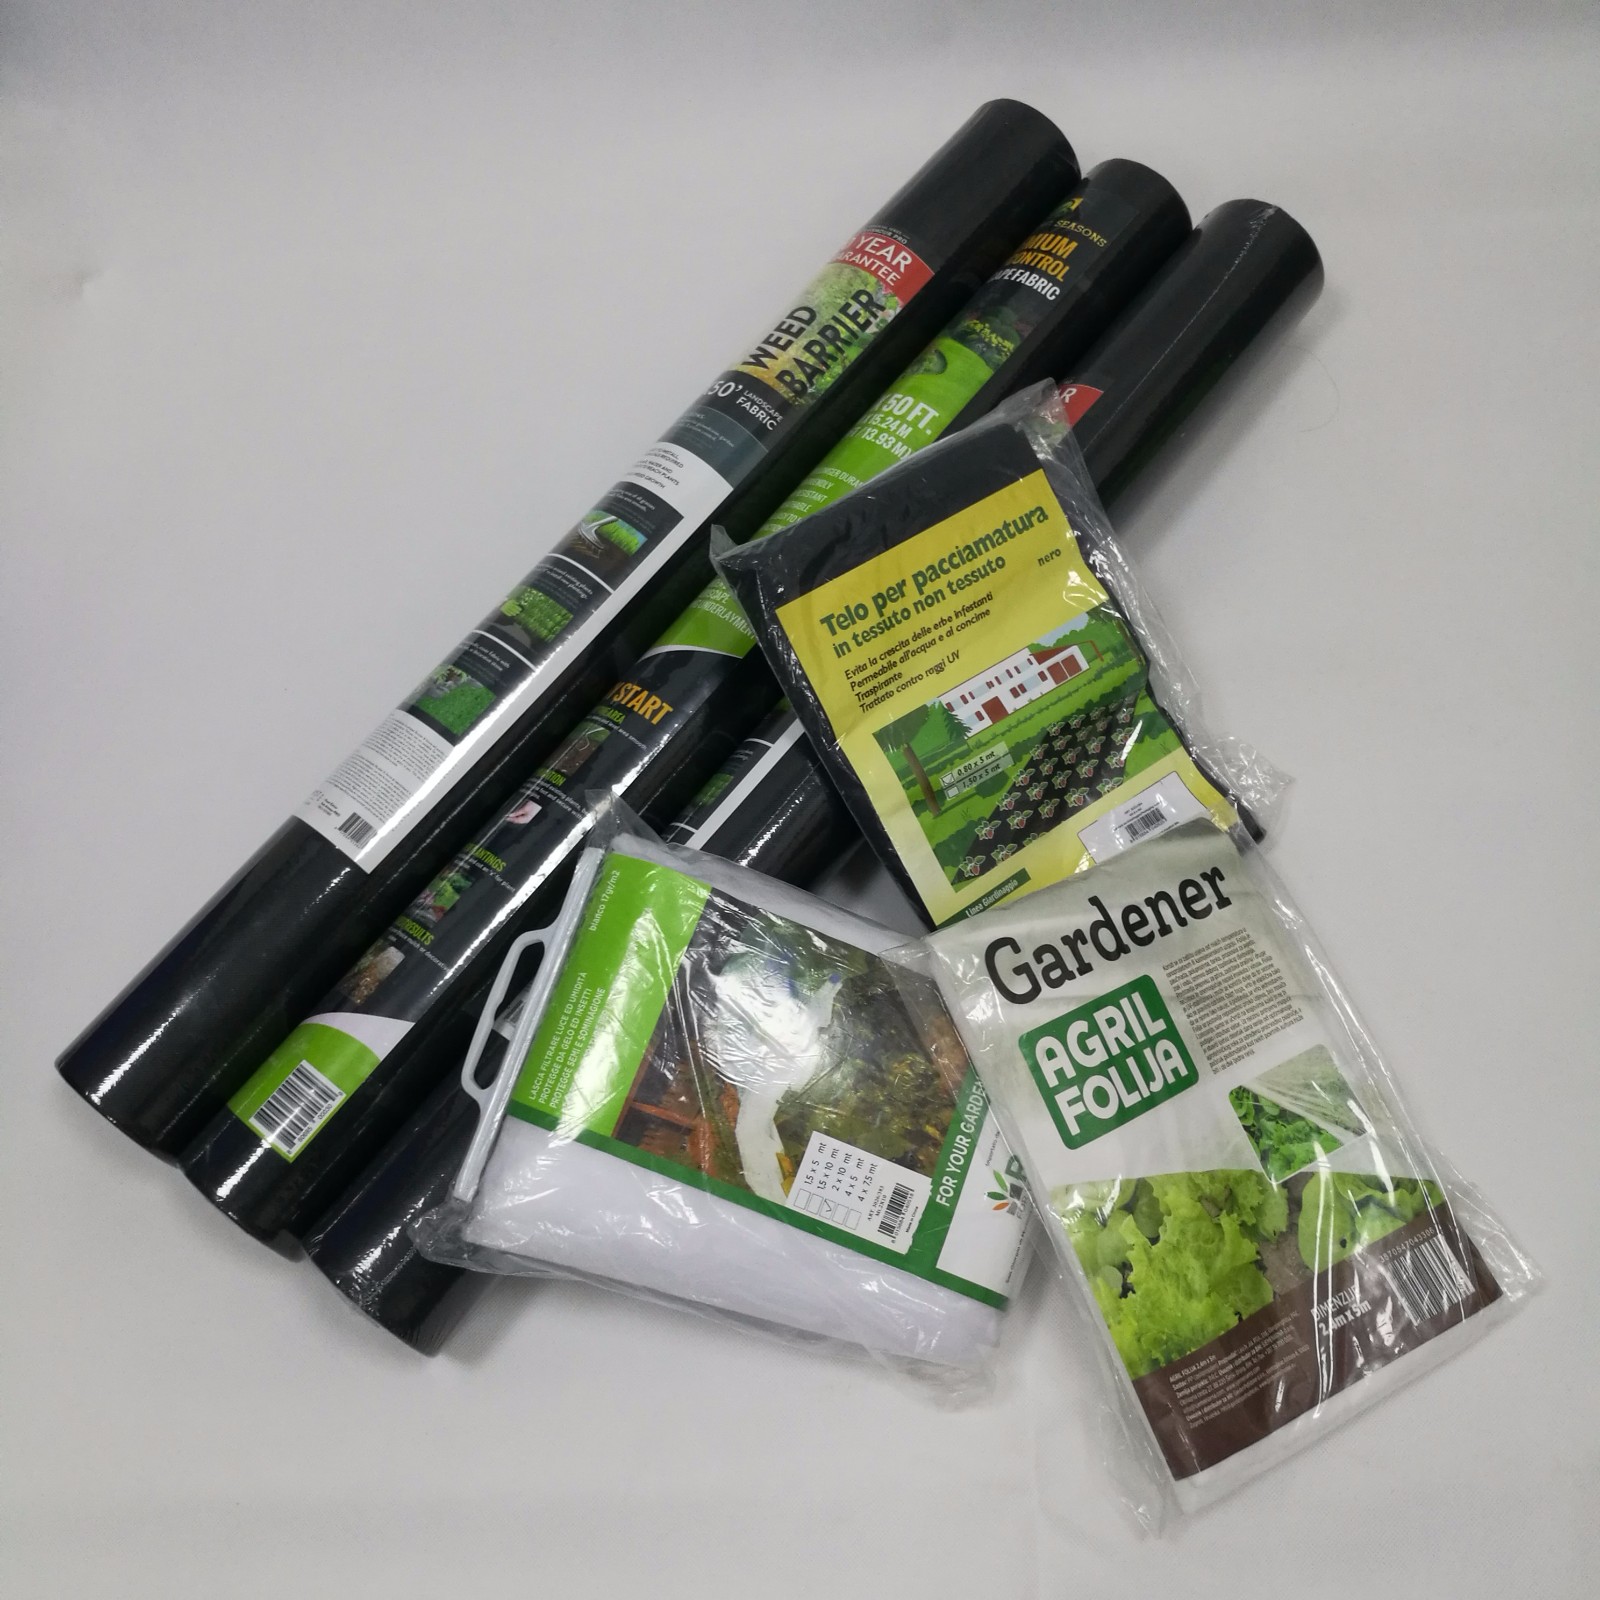 Agriculture Accessories For Garden Weed Control Manufacturers, Agriculture Accessories For Garden Weed Control Factory, Supply Agriculture Accessories For Garden Weed Control